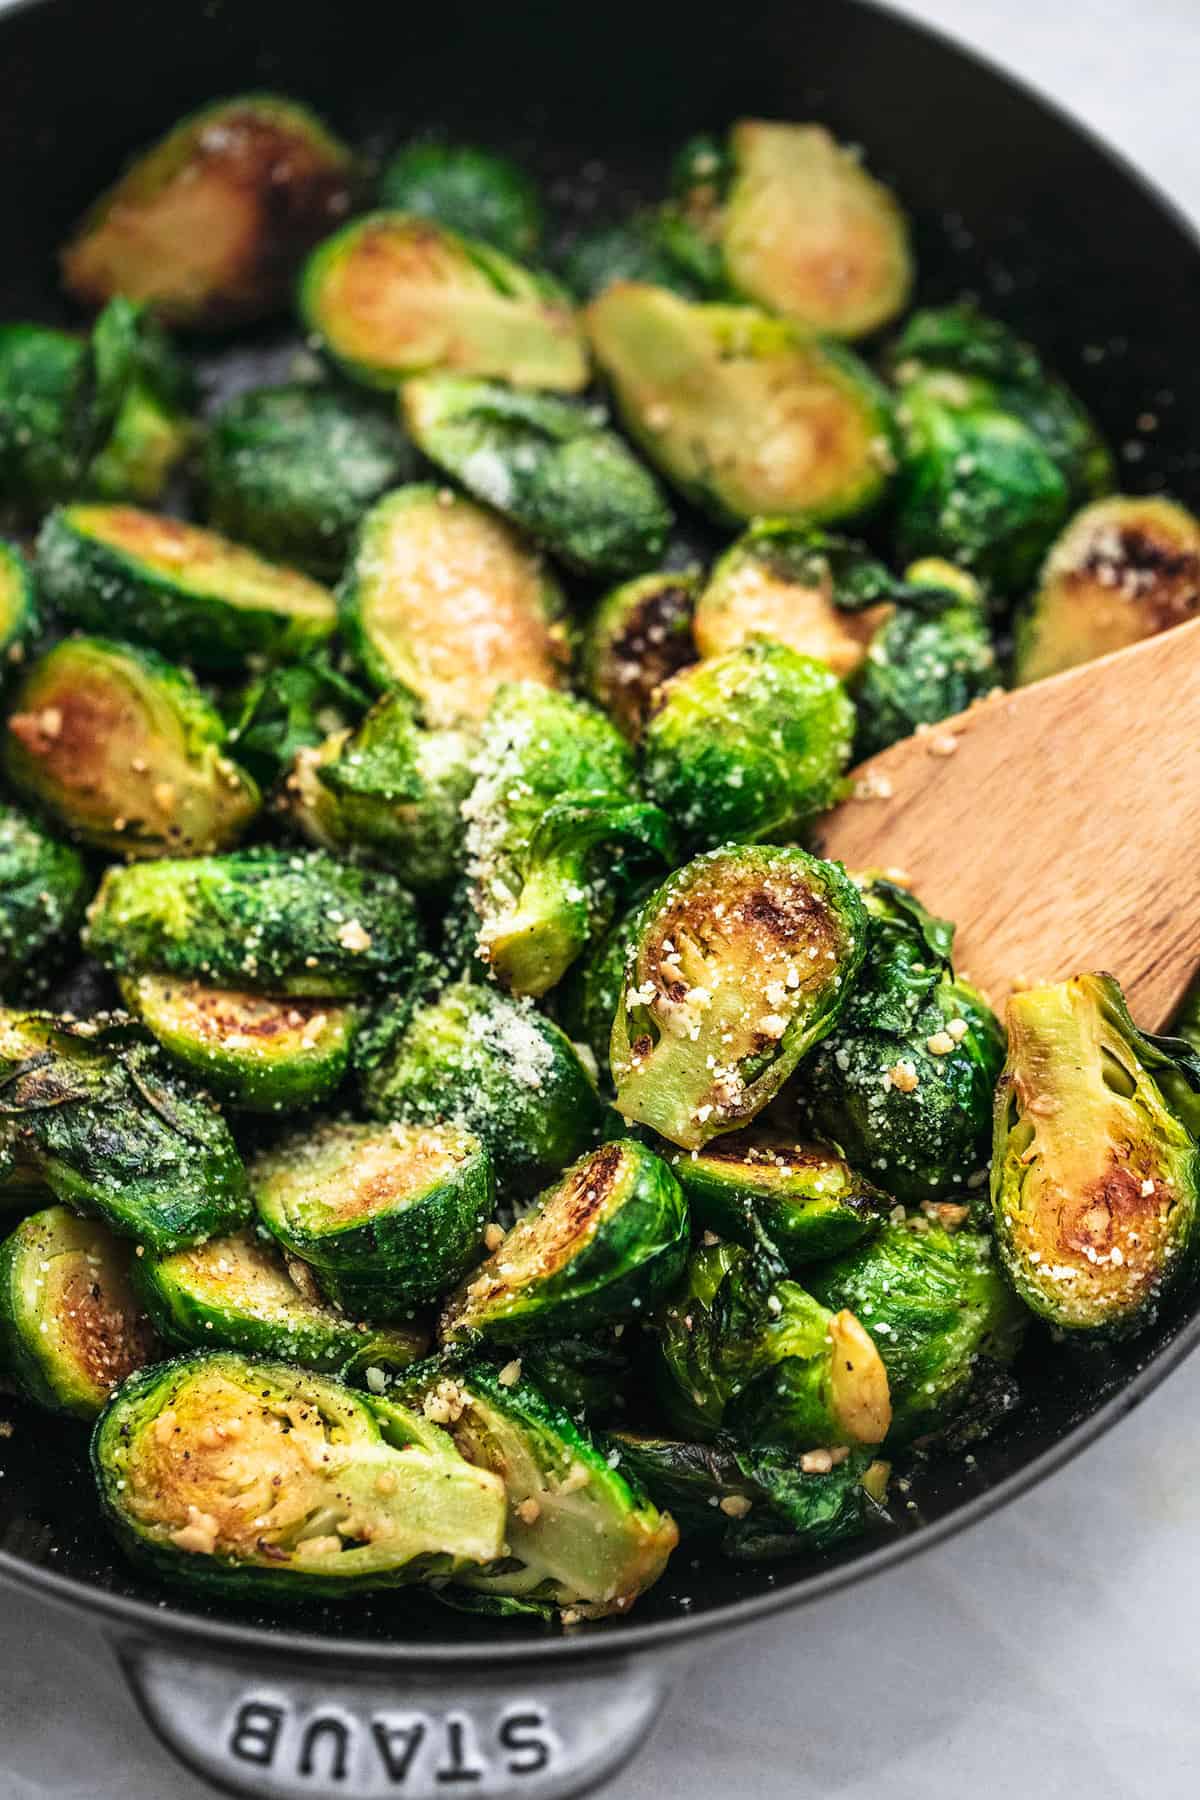 Sauteed Brussels Sprouts Recipe easy side dish with parmesan and garlic | lecremedelacrumb.com